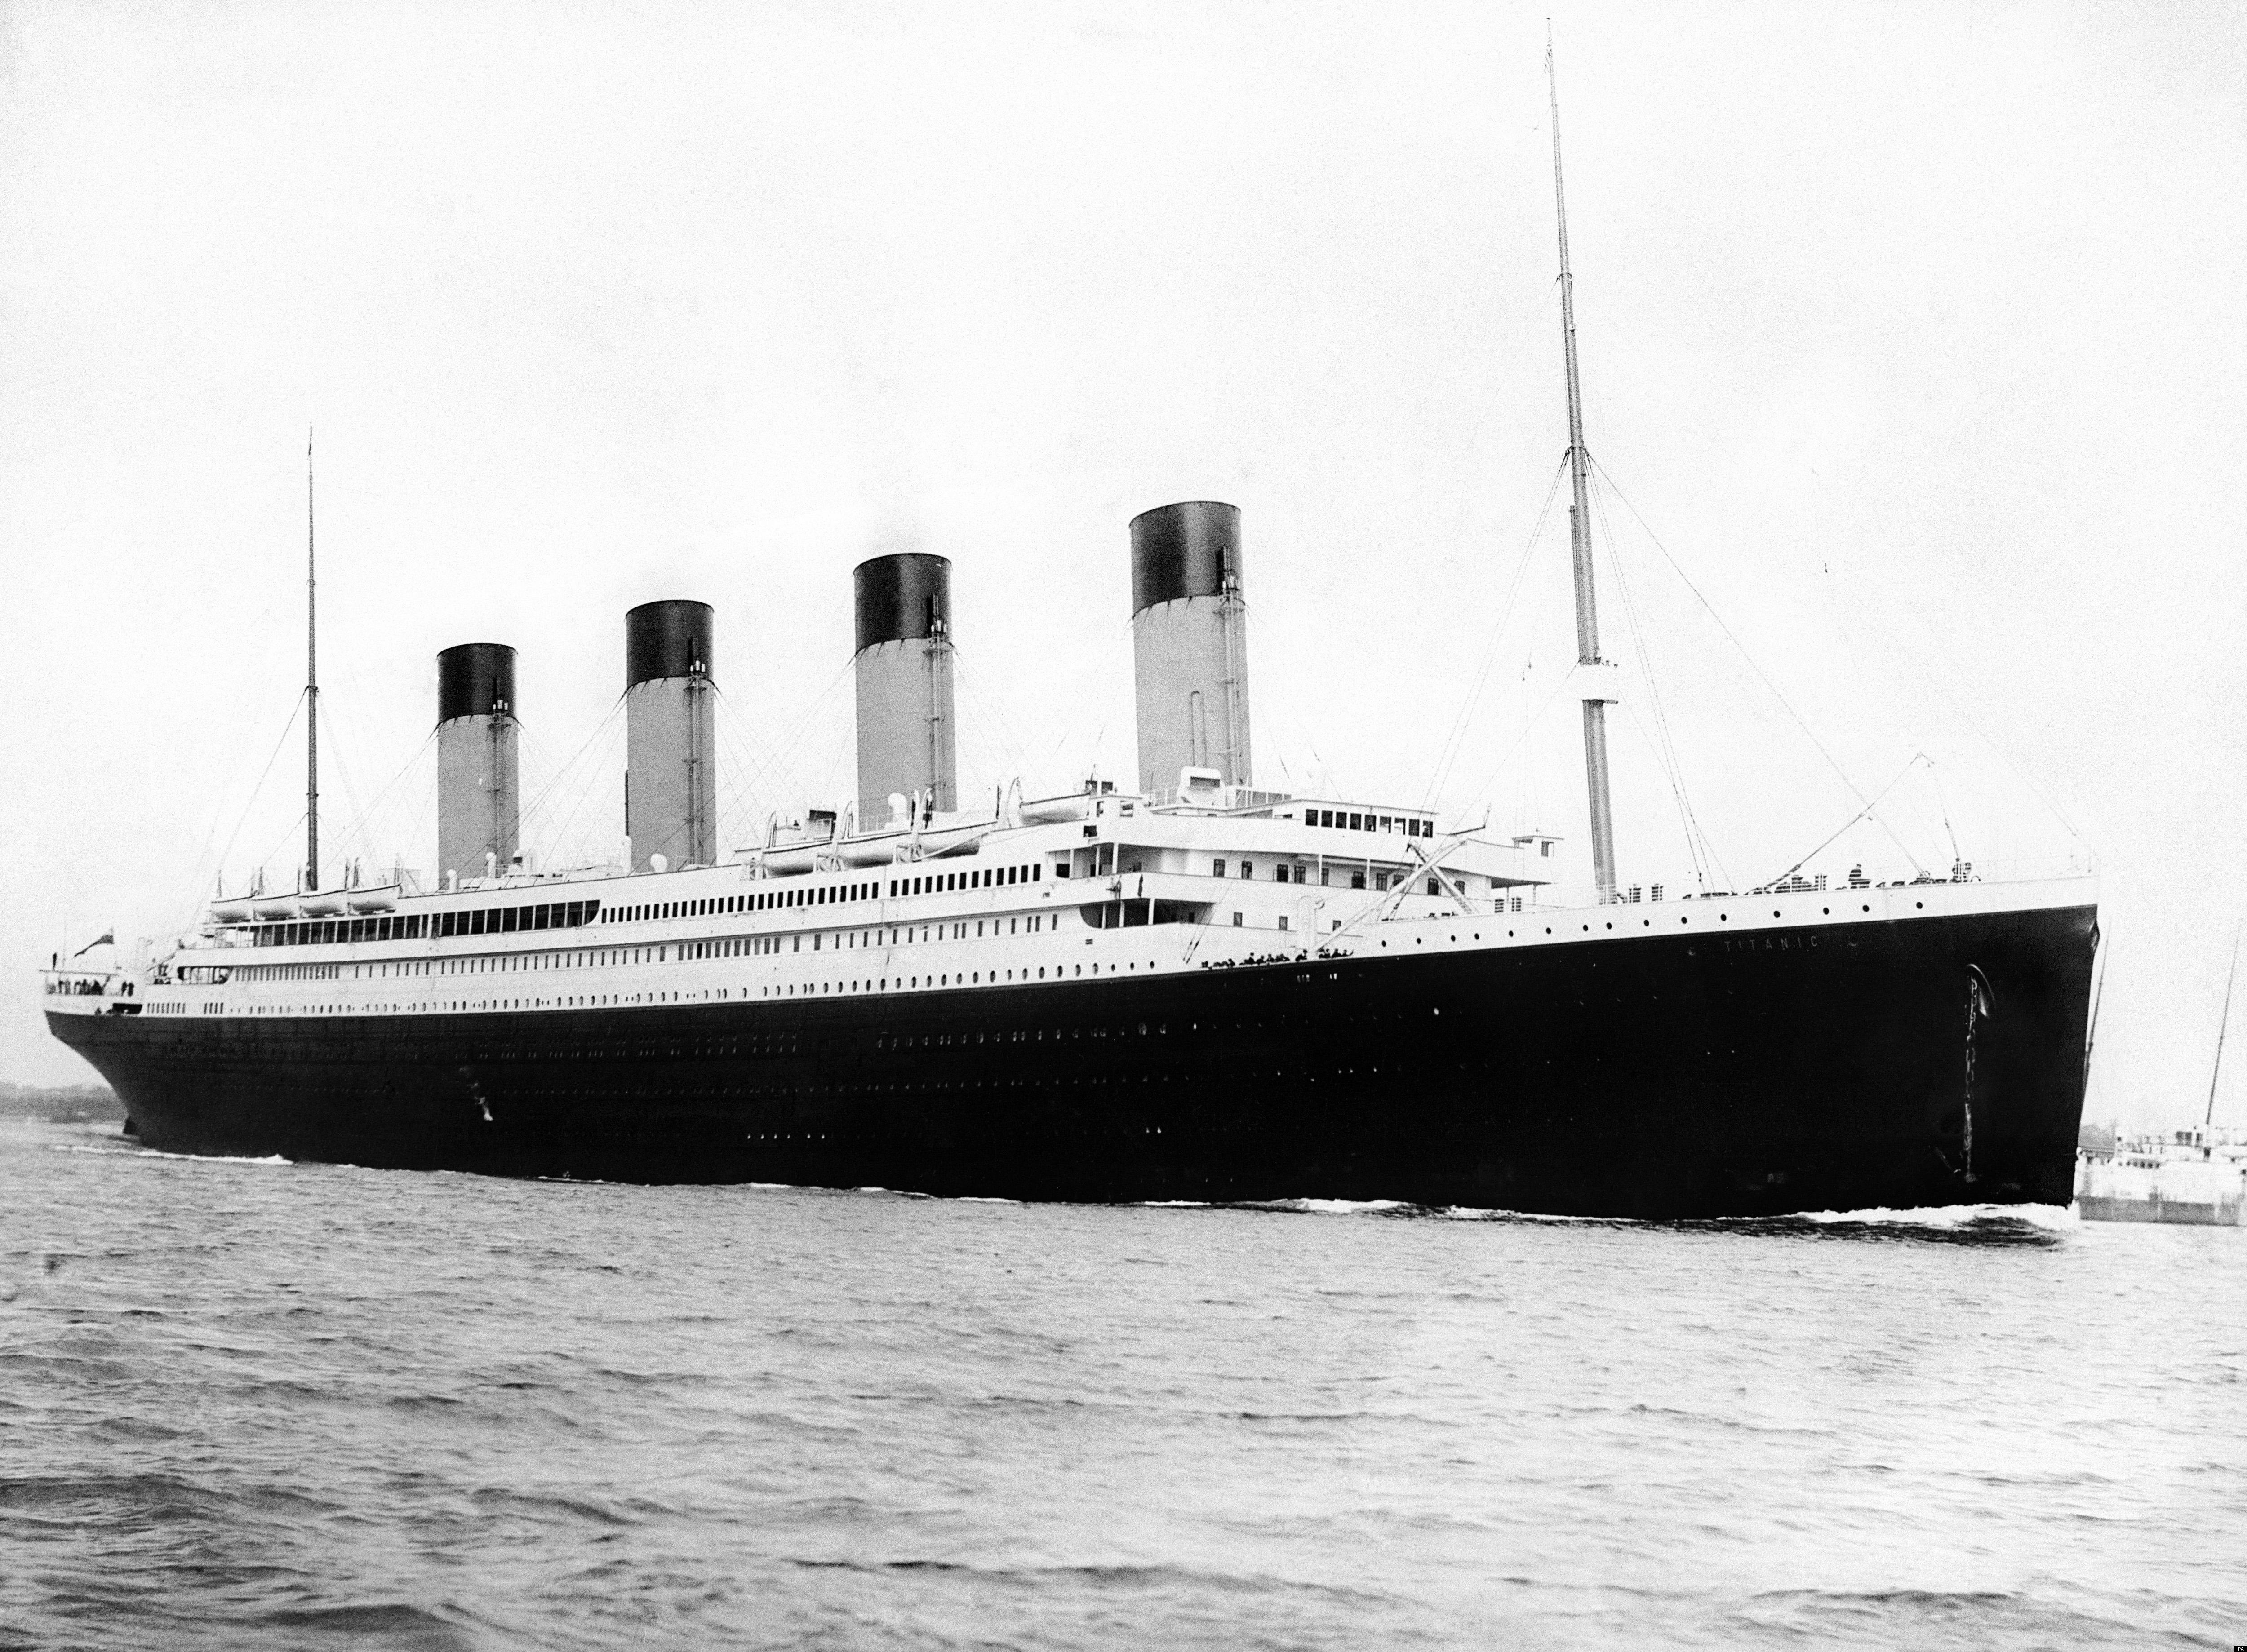 Sinking of Titanic in 1912 left a storyline for the ages 